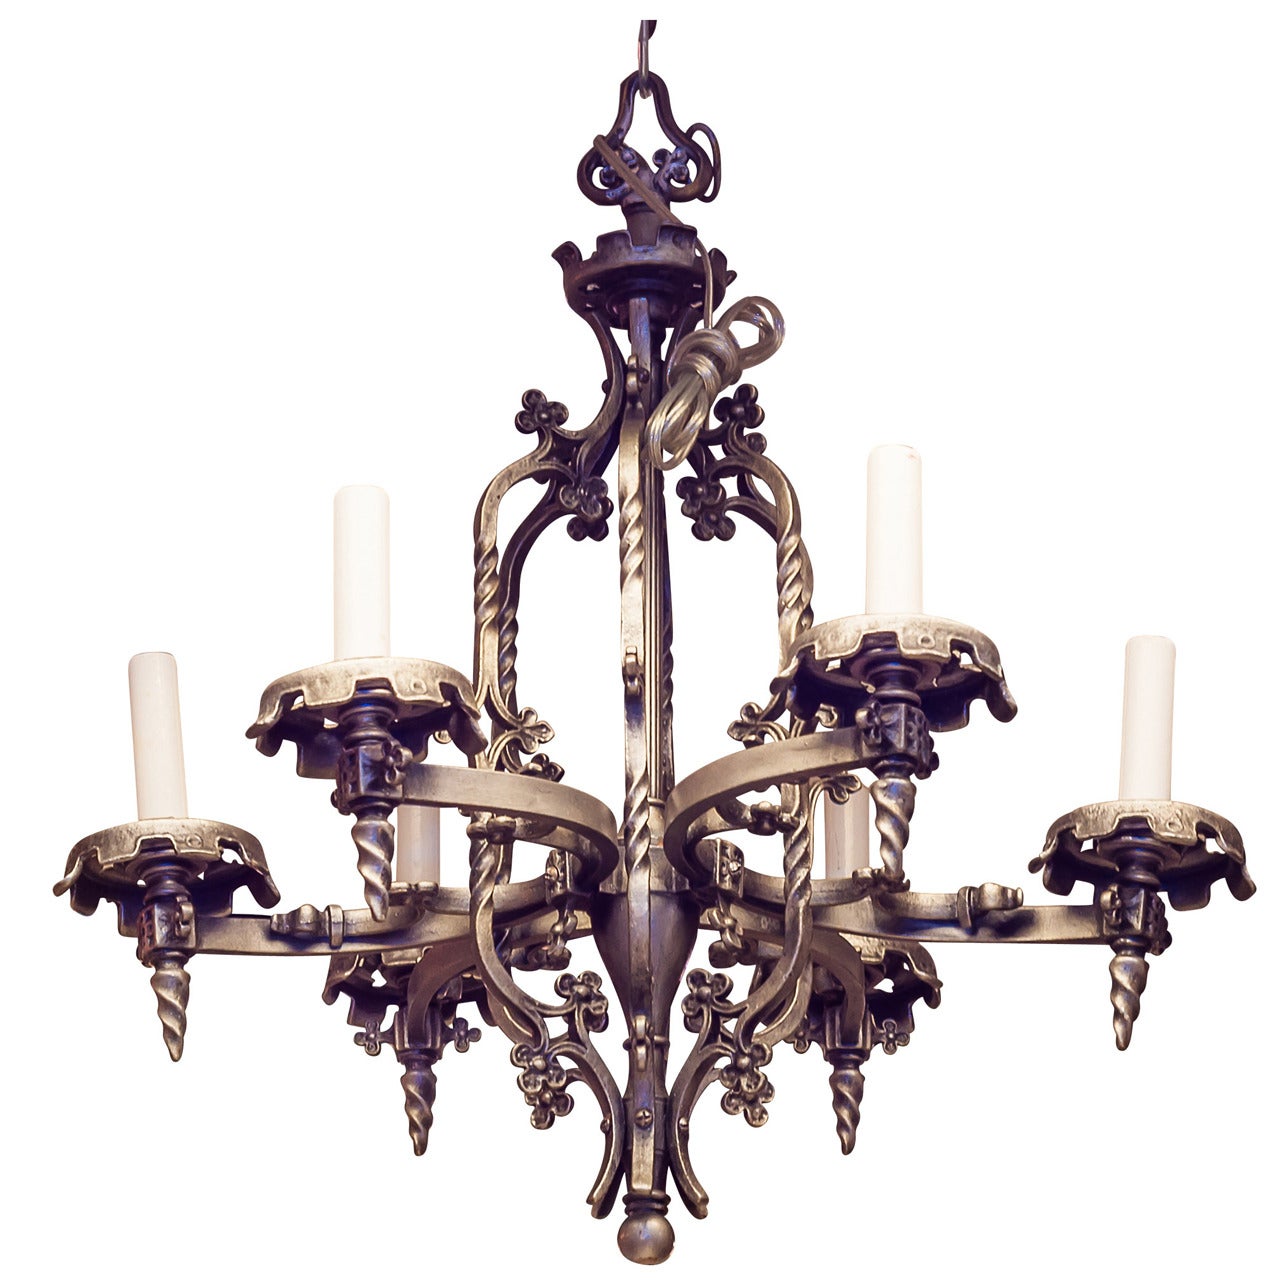 Wrought Iron Six-Light Chandelier with Twisted Design